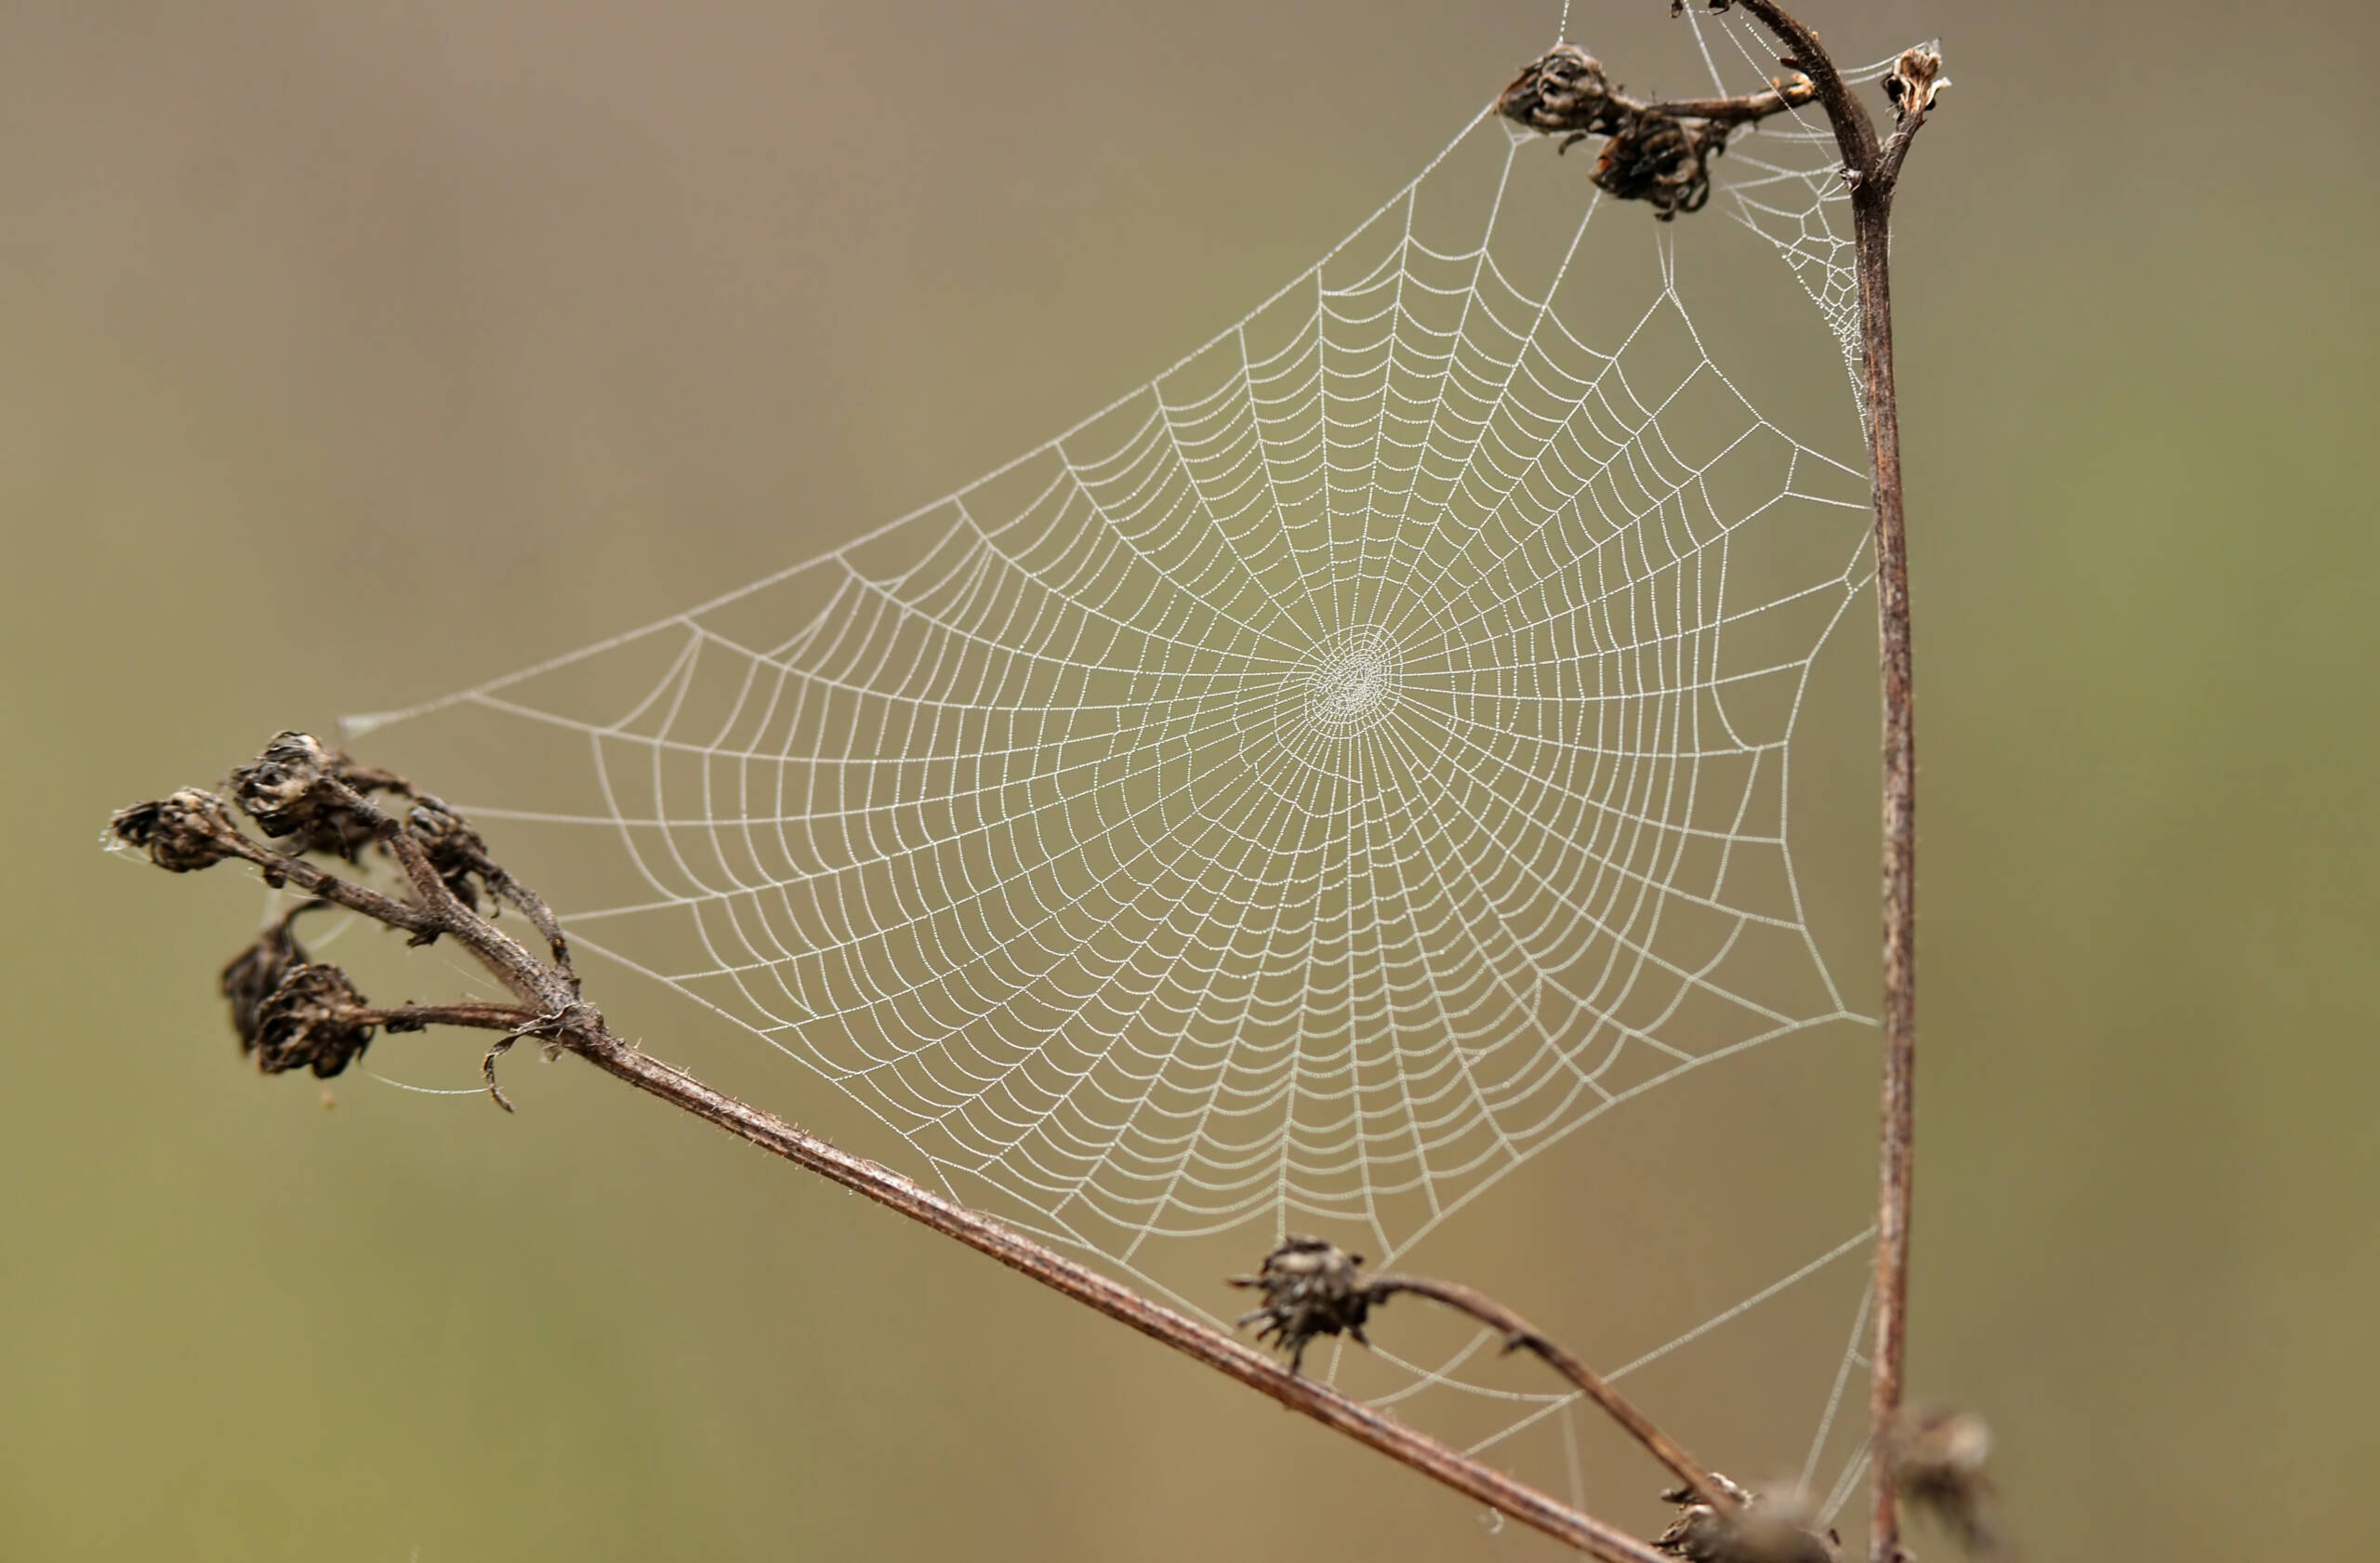 Close up photo of spider web on a dry plant